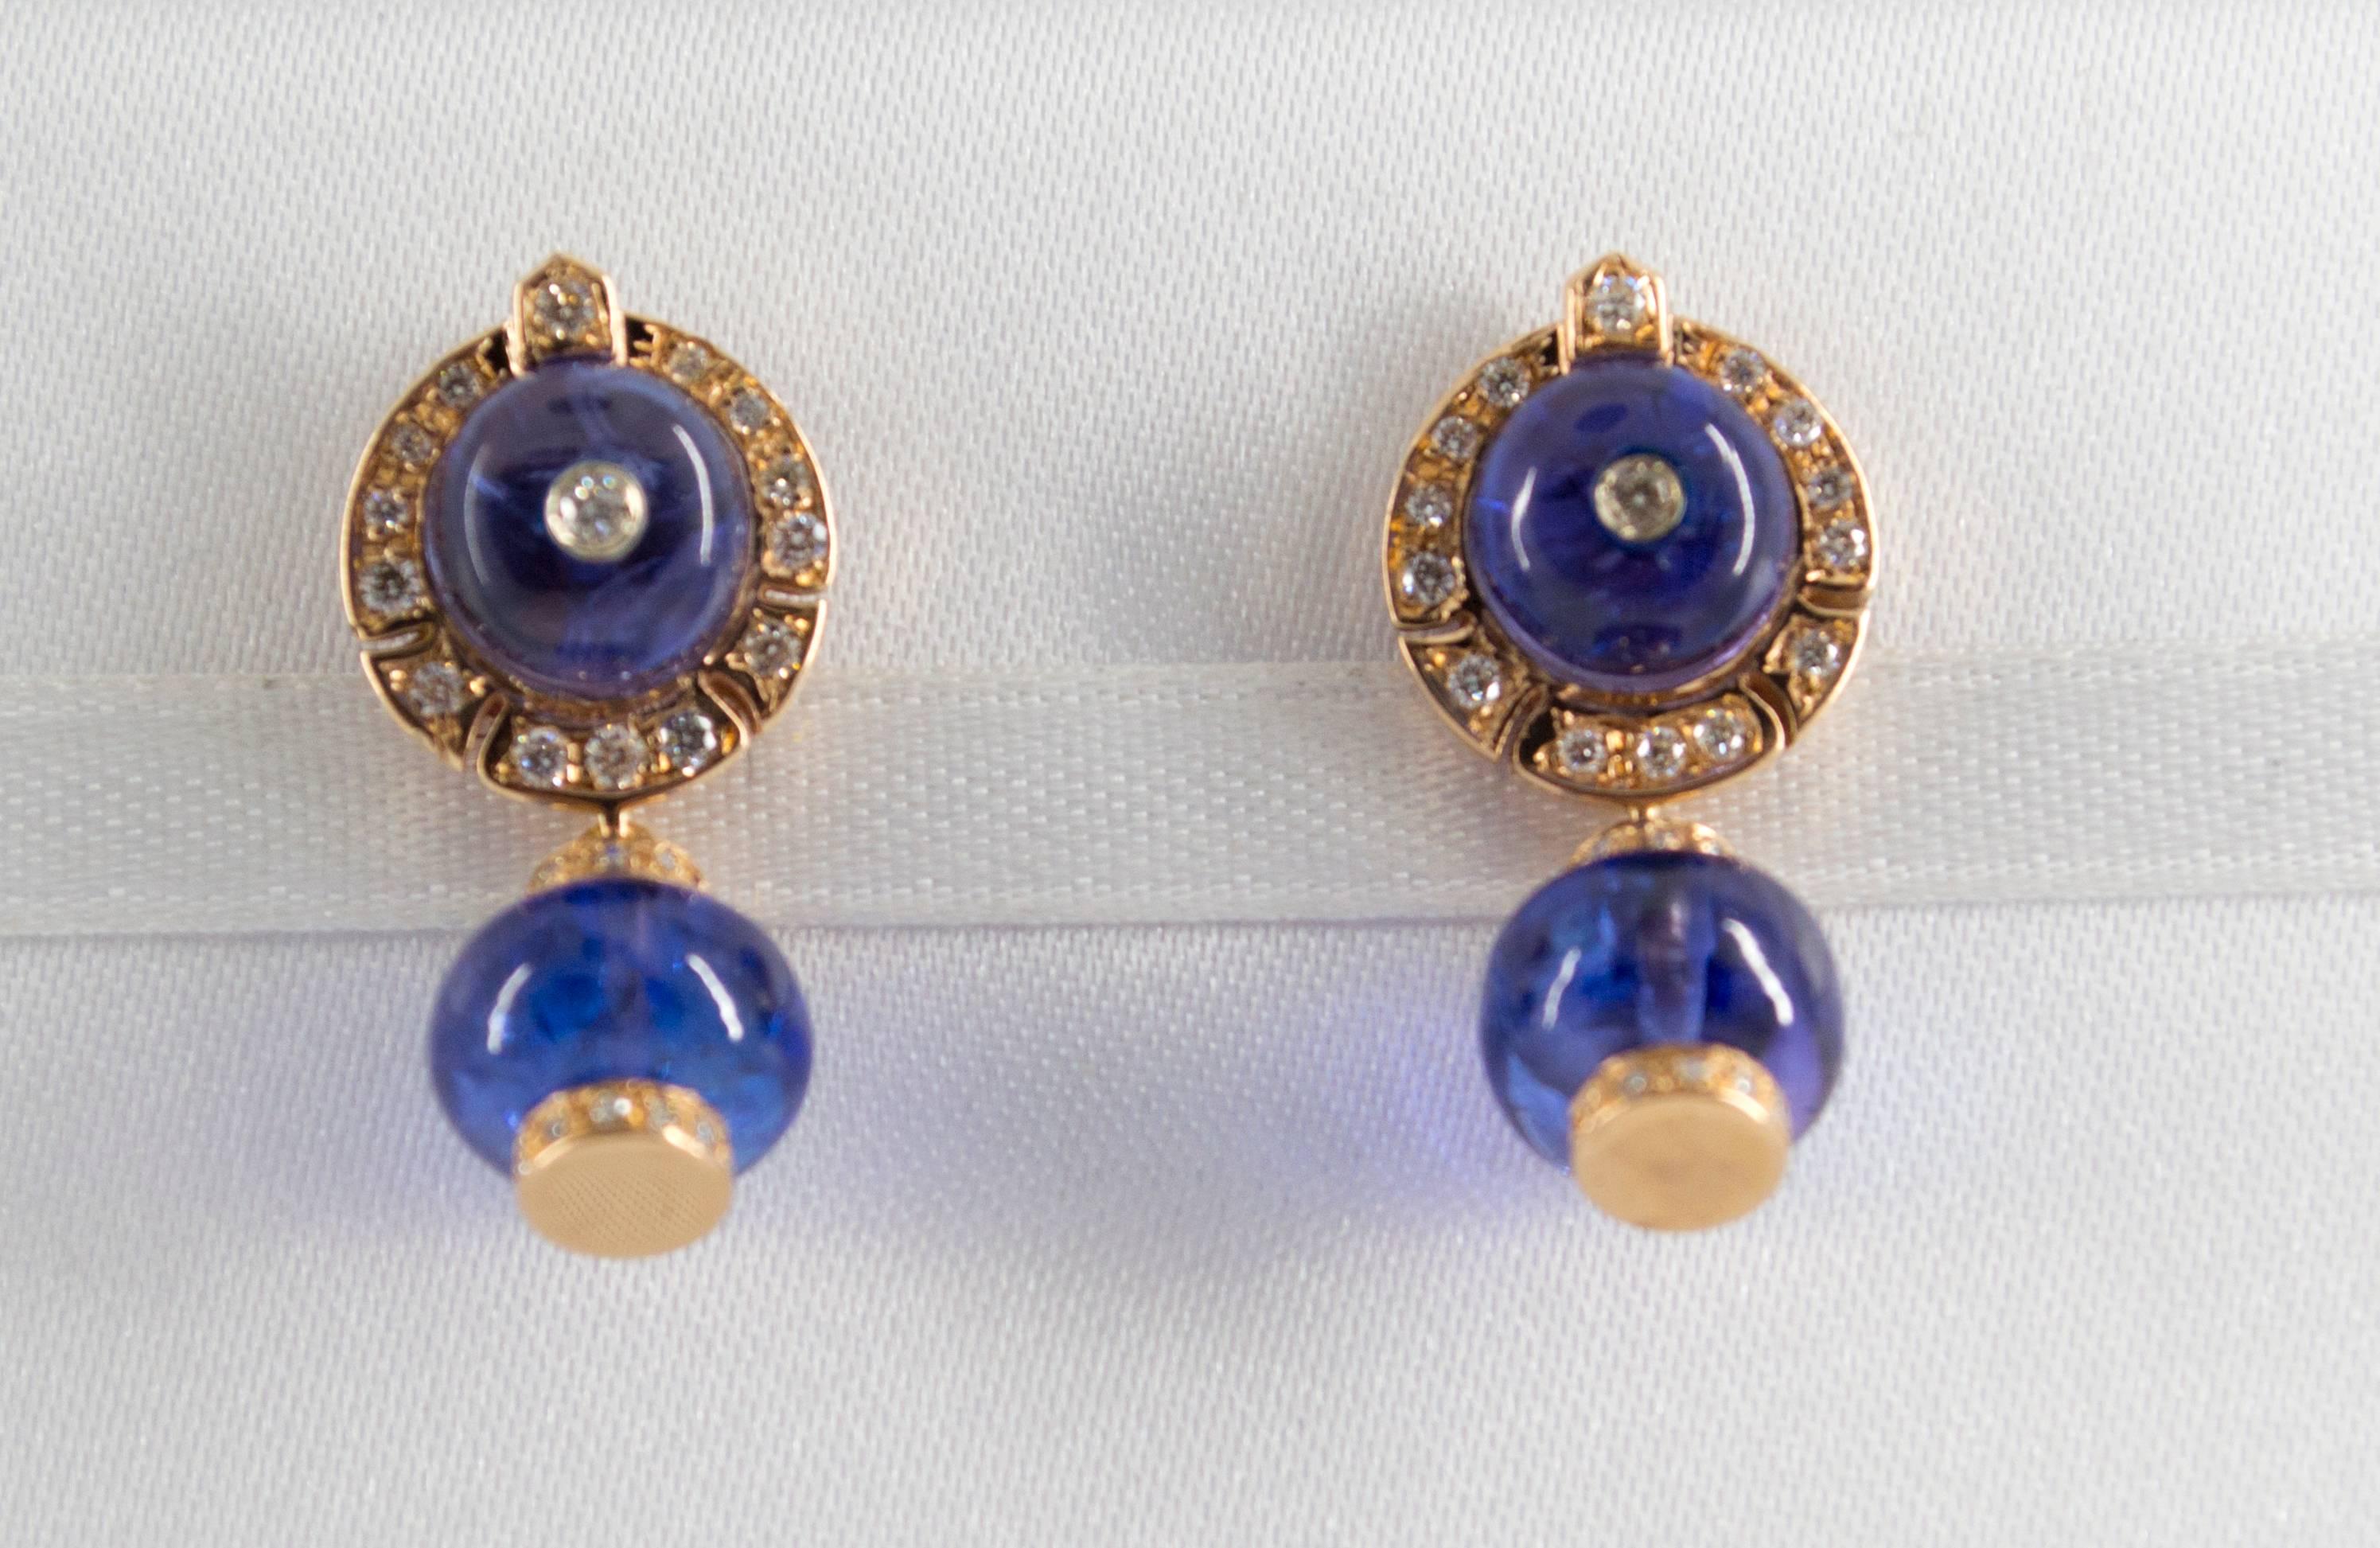 This Earrings are made of 14K Yellow Gold.
This Earrings have 21.00 Carats of Tanzanite.
This Earrings have 0.50 Carats of White Diamonds.
All our Earrings have pins for pierced ears but we can change the closure and make any of our Earrings